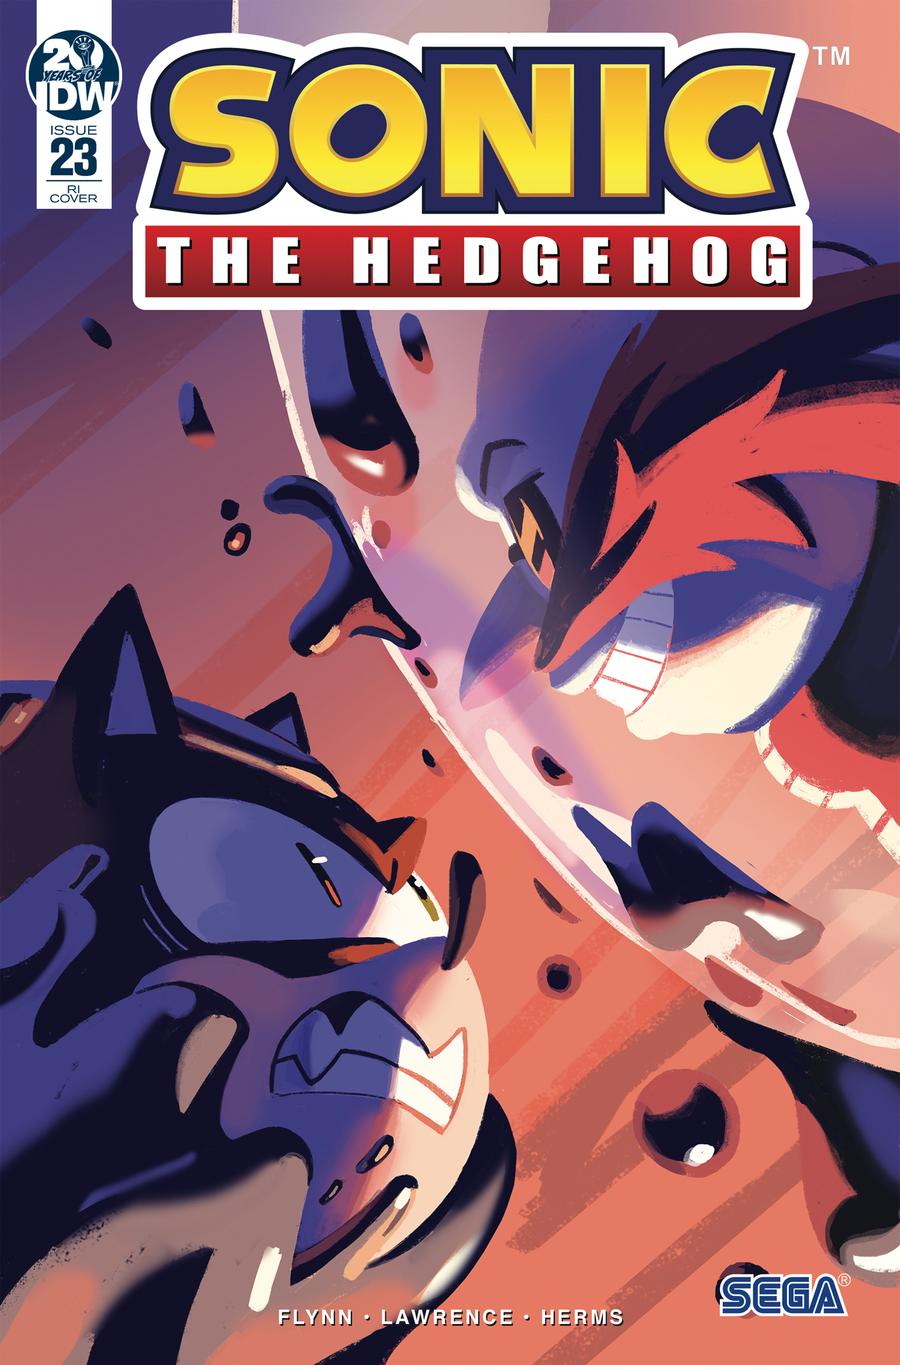 Sonic The Hedgehog Vol 3 #23 Cover C Incentive Nathalie Fourdraine Variant Cover